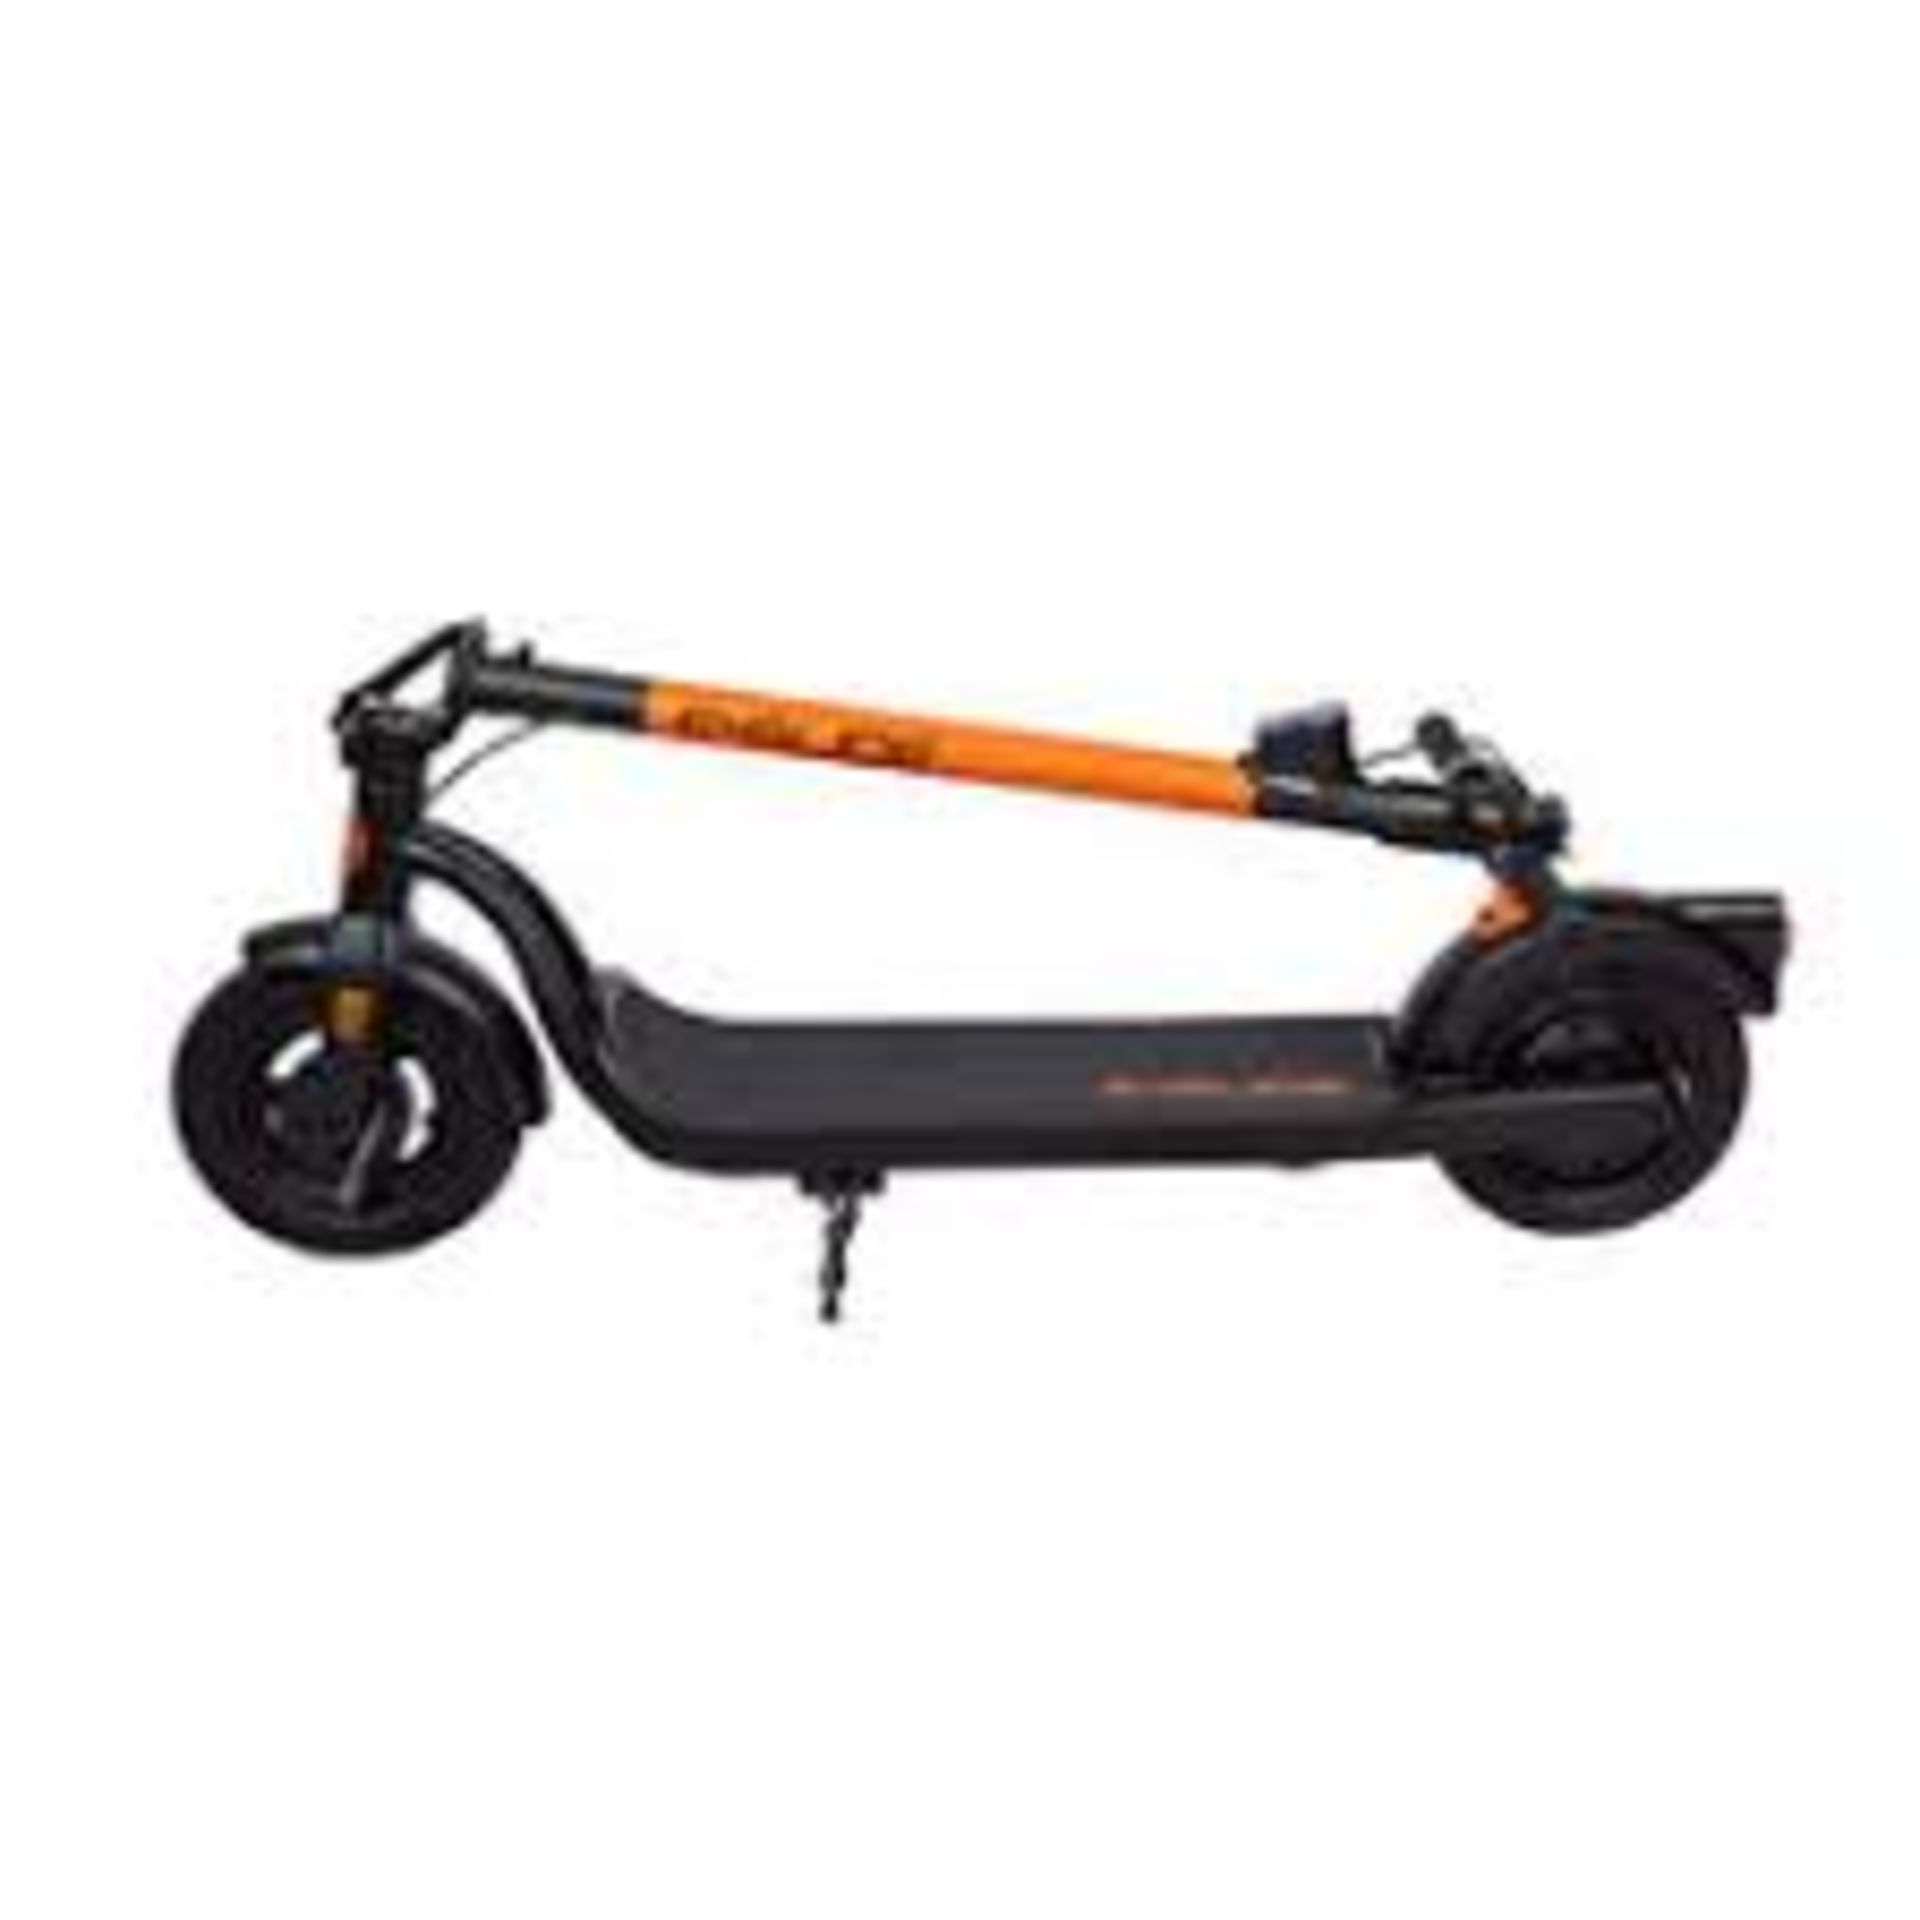 Trade Lot 4 x Brand New E-Glide V2 Electric Scooter Orange and Black RRP £599, Introducing a sleek - Bild 2 aus 2